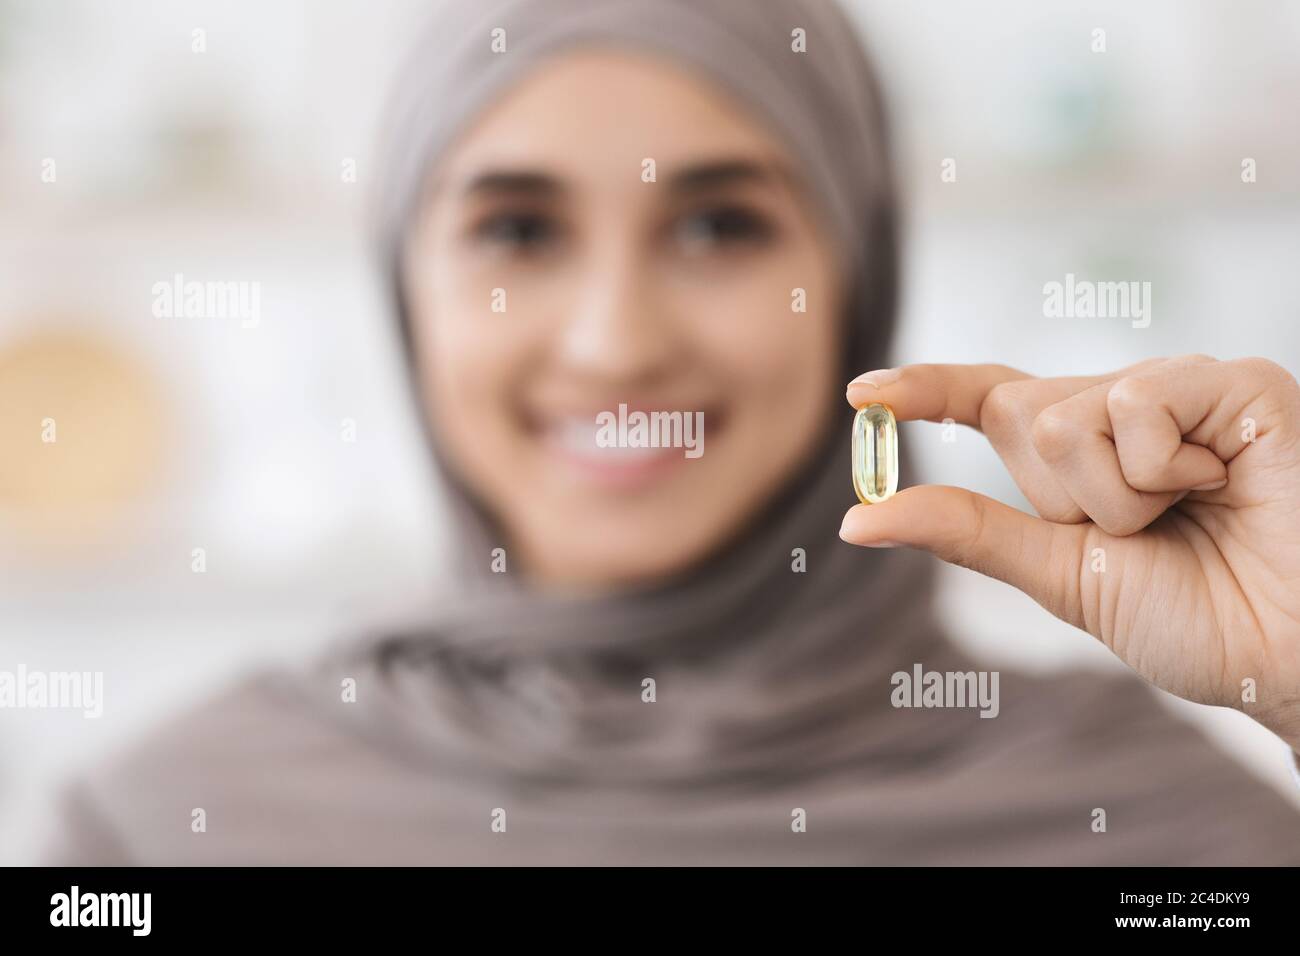 Vitamins And Food Supplements. Omega-3 Pill In Hands Of Smiling Arab Girl Stock Photo